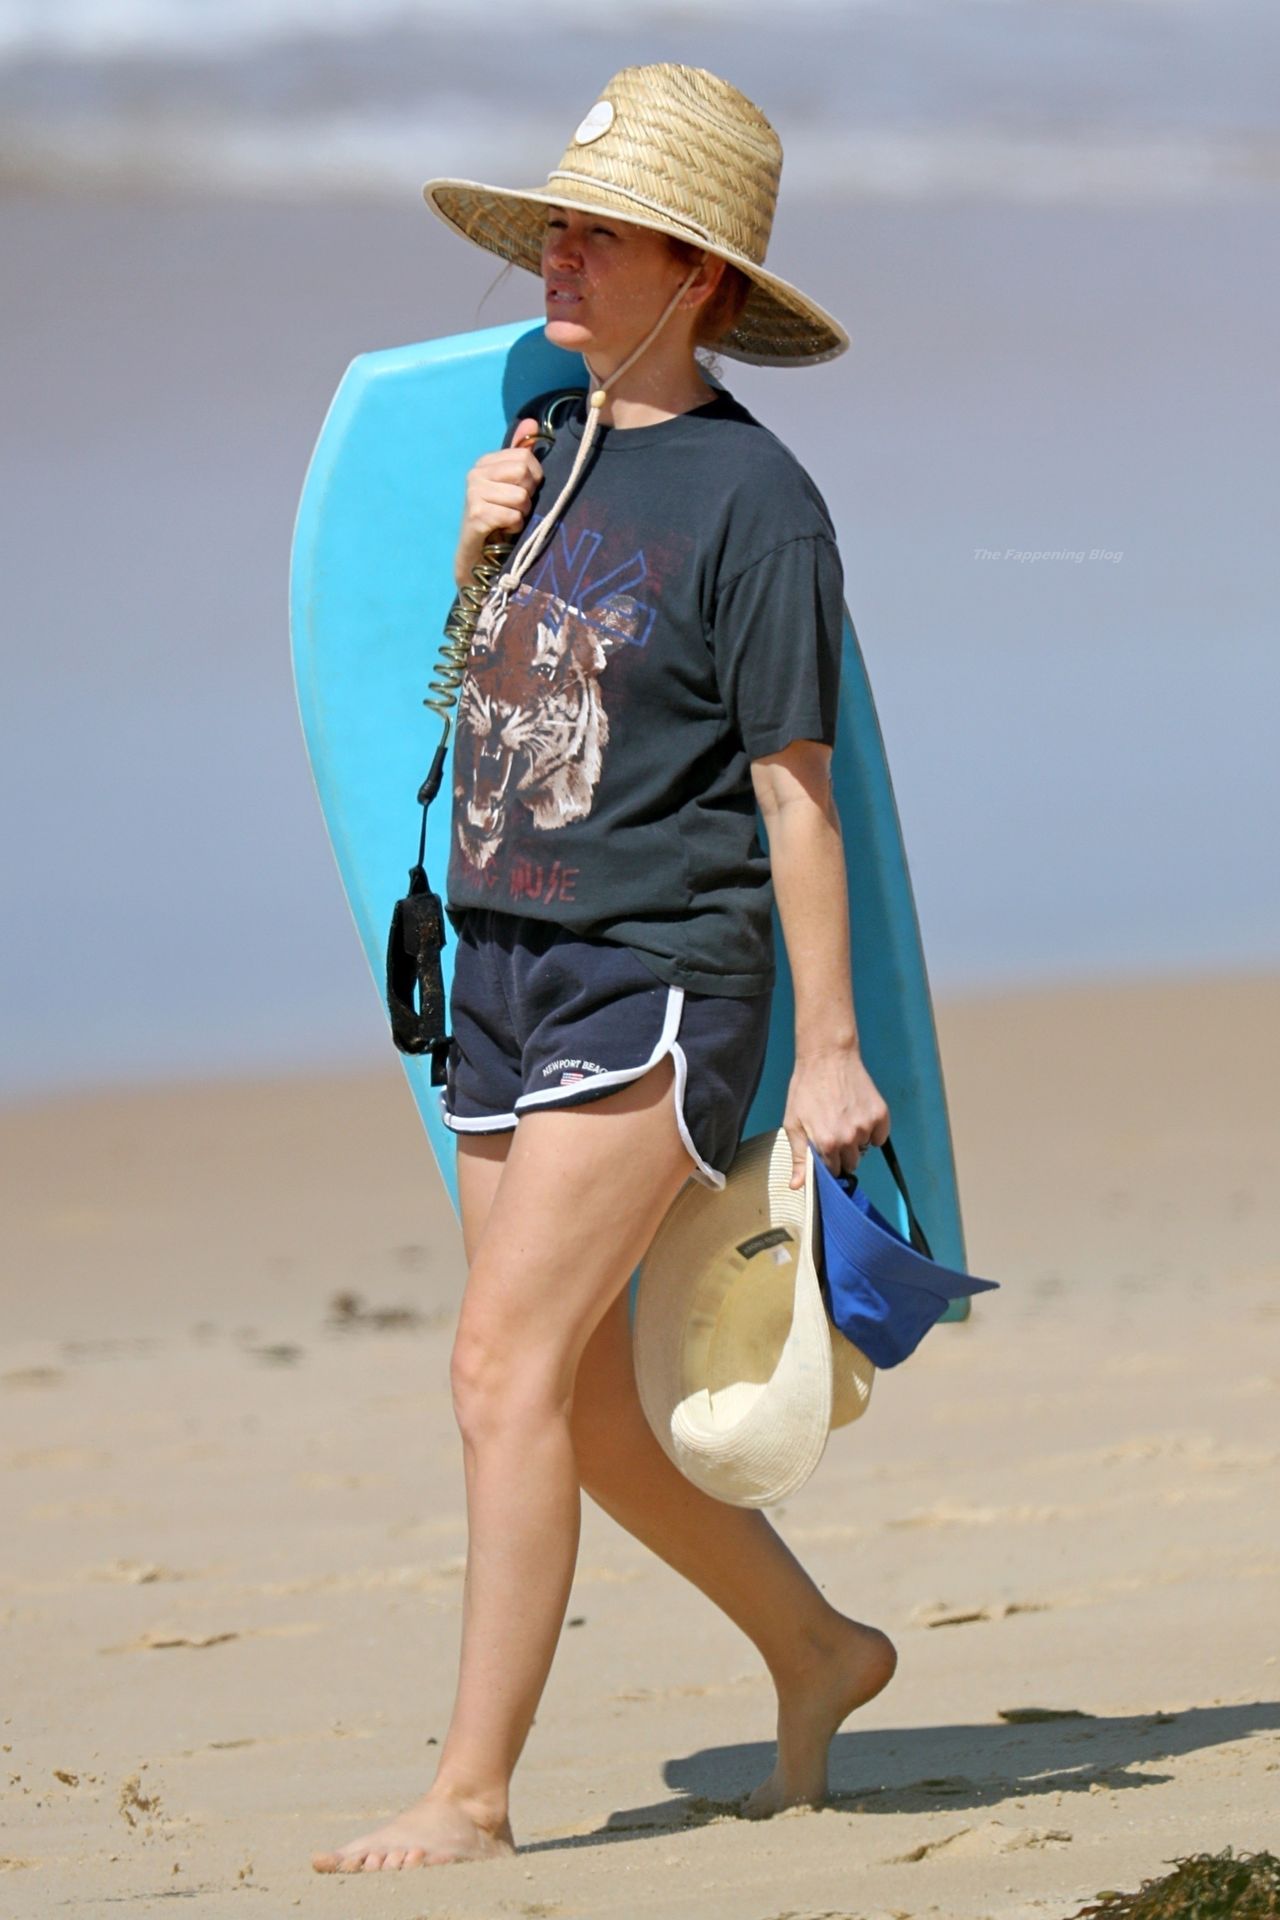 Isla Fisher Hits the Beach for Easter Geta
way on the South Coast (43 Photos)